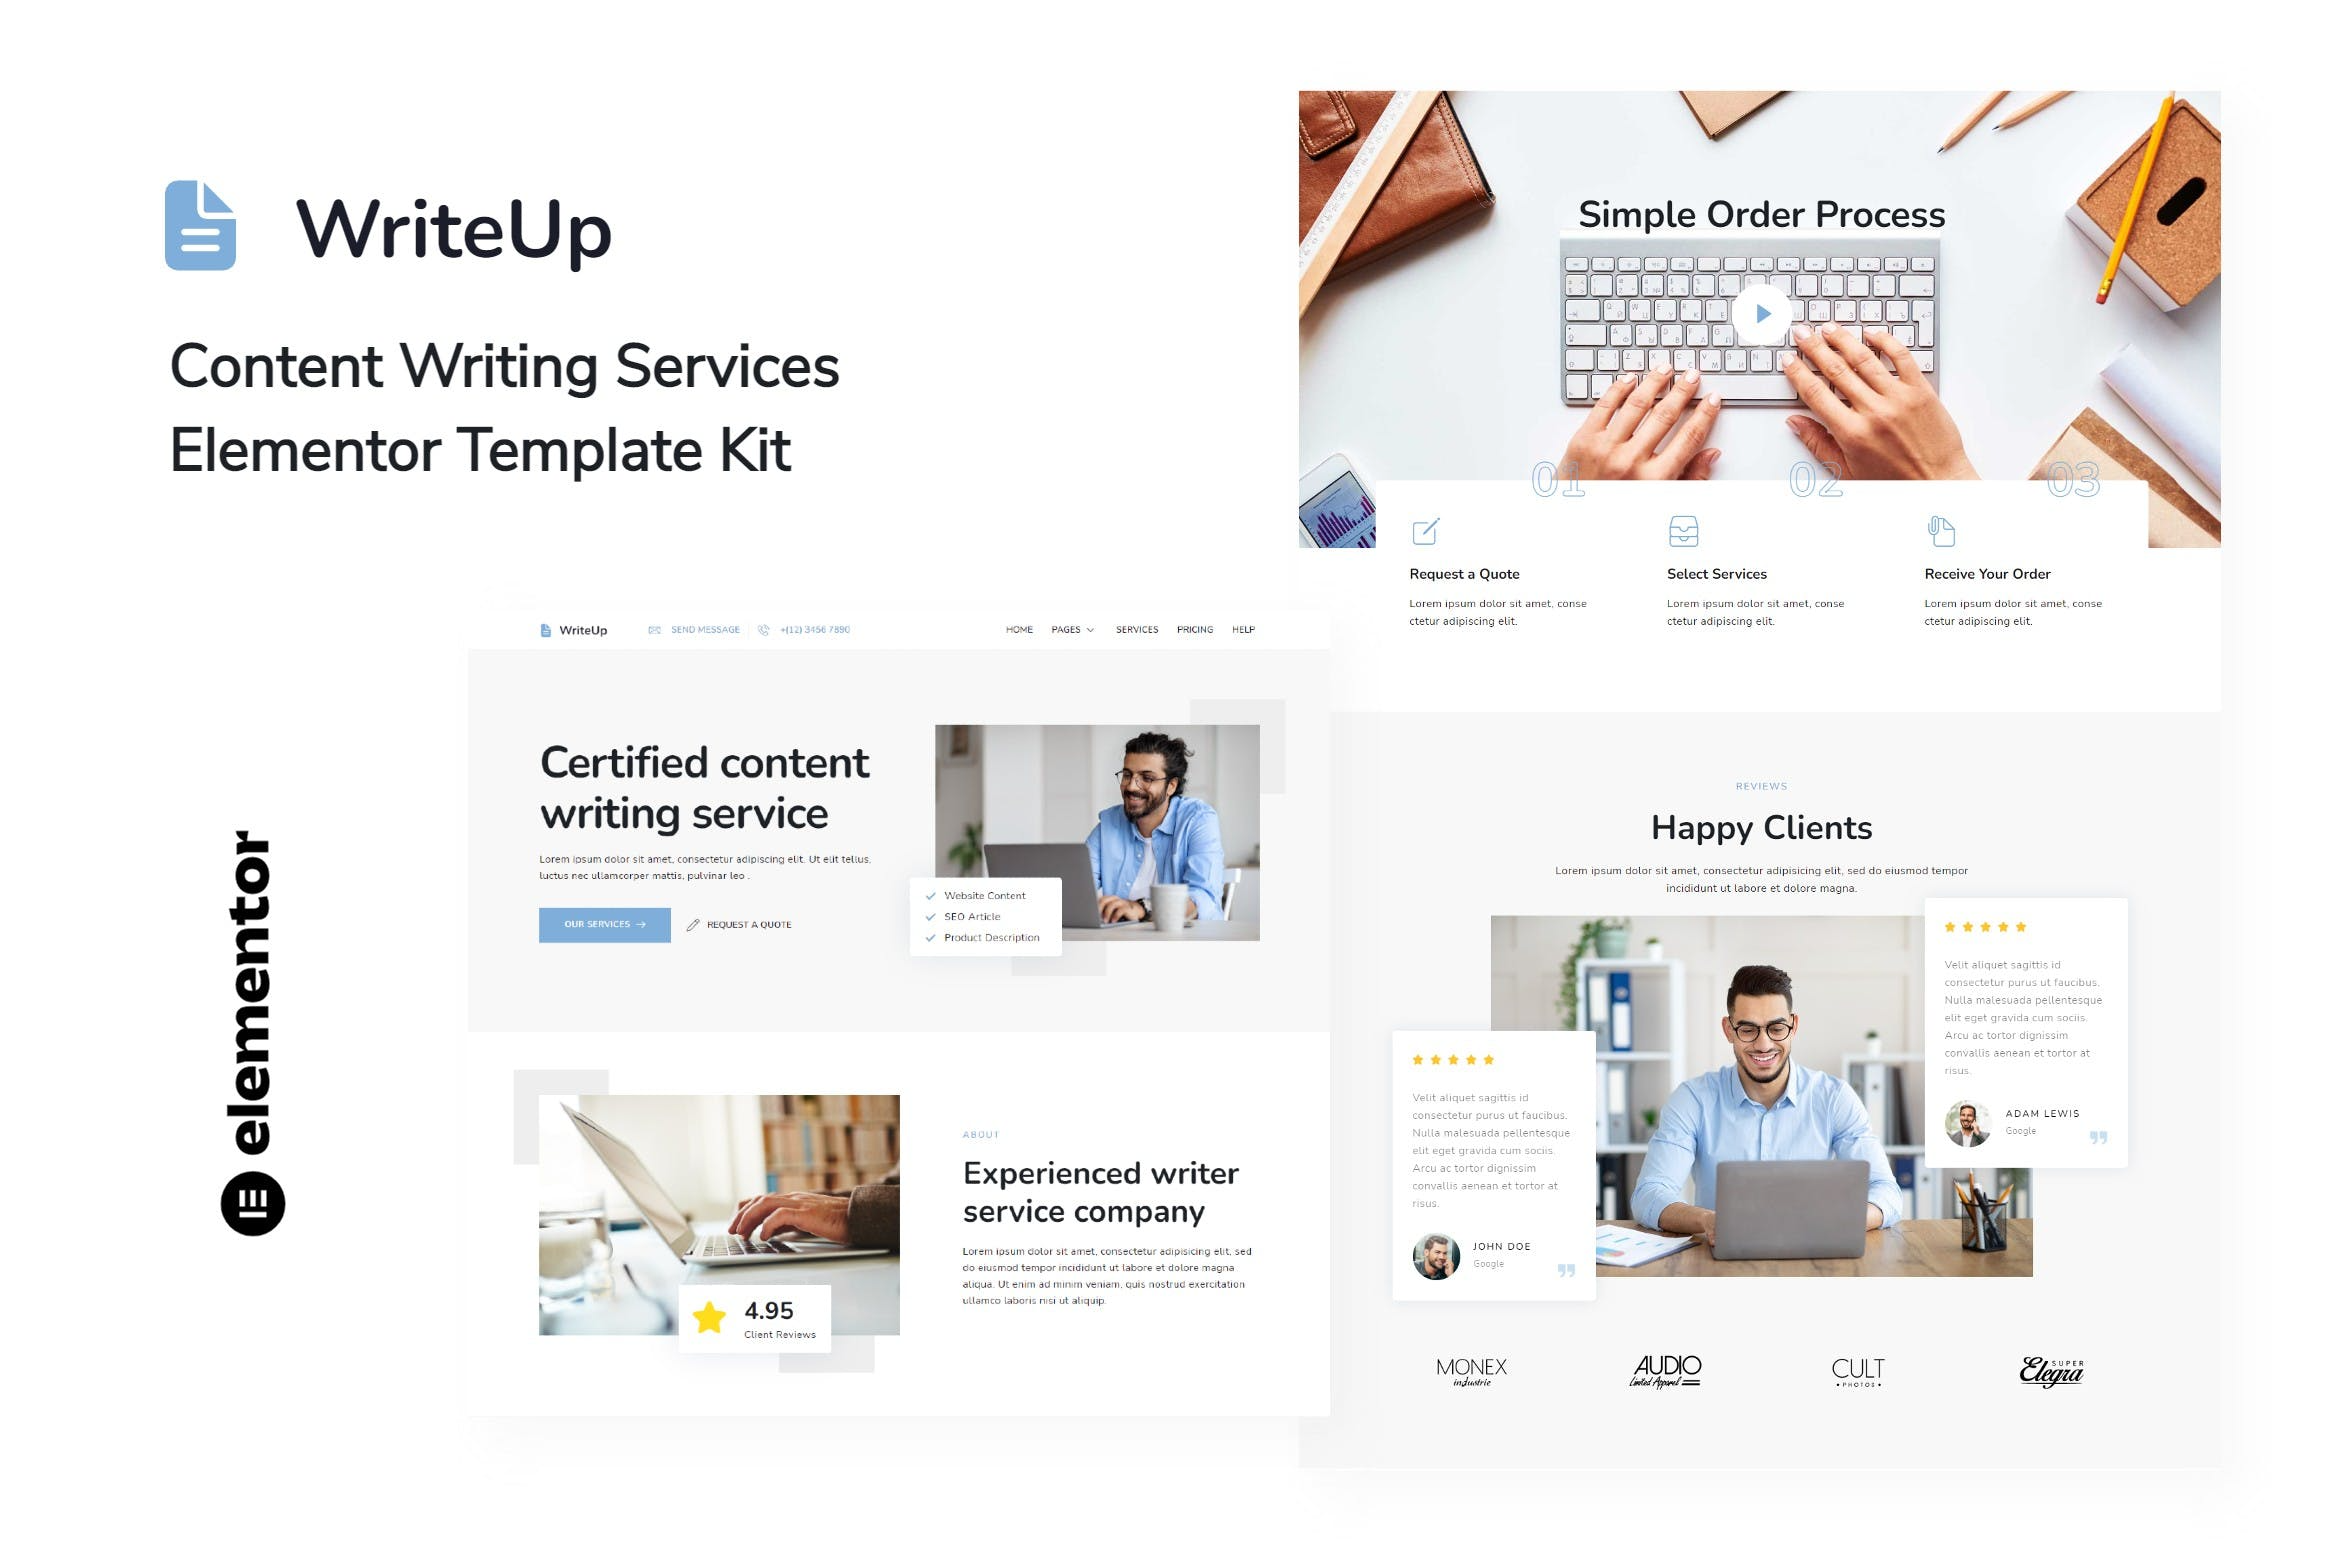 WriteUp - Content Writing Services Elementor Template Kit